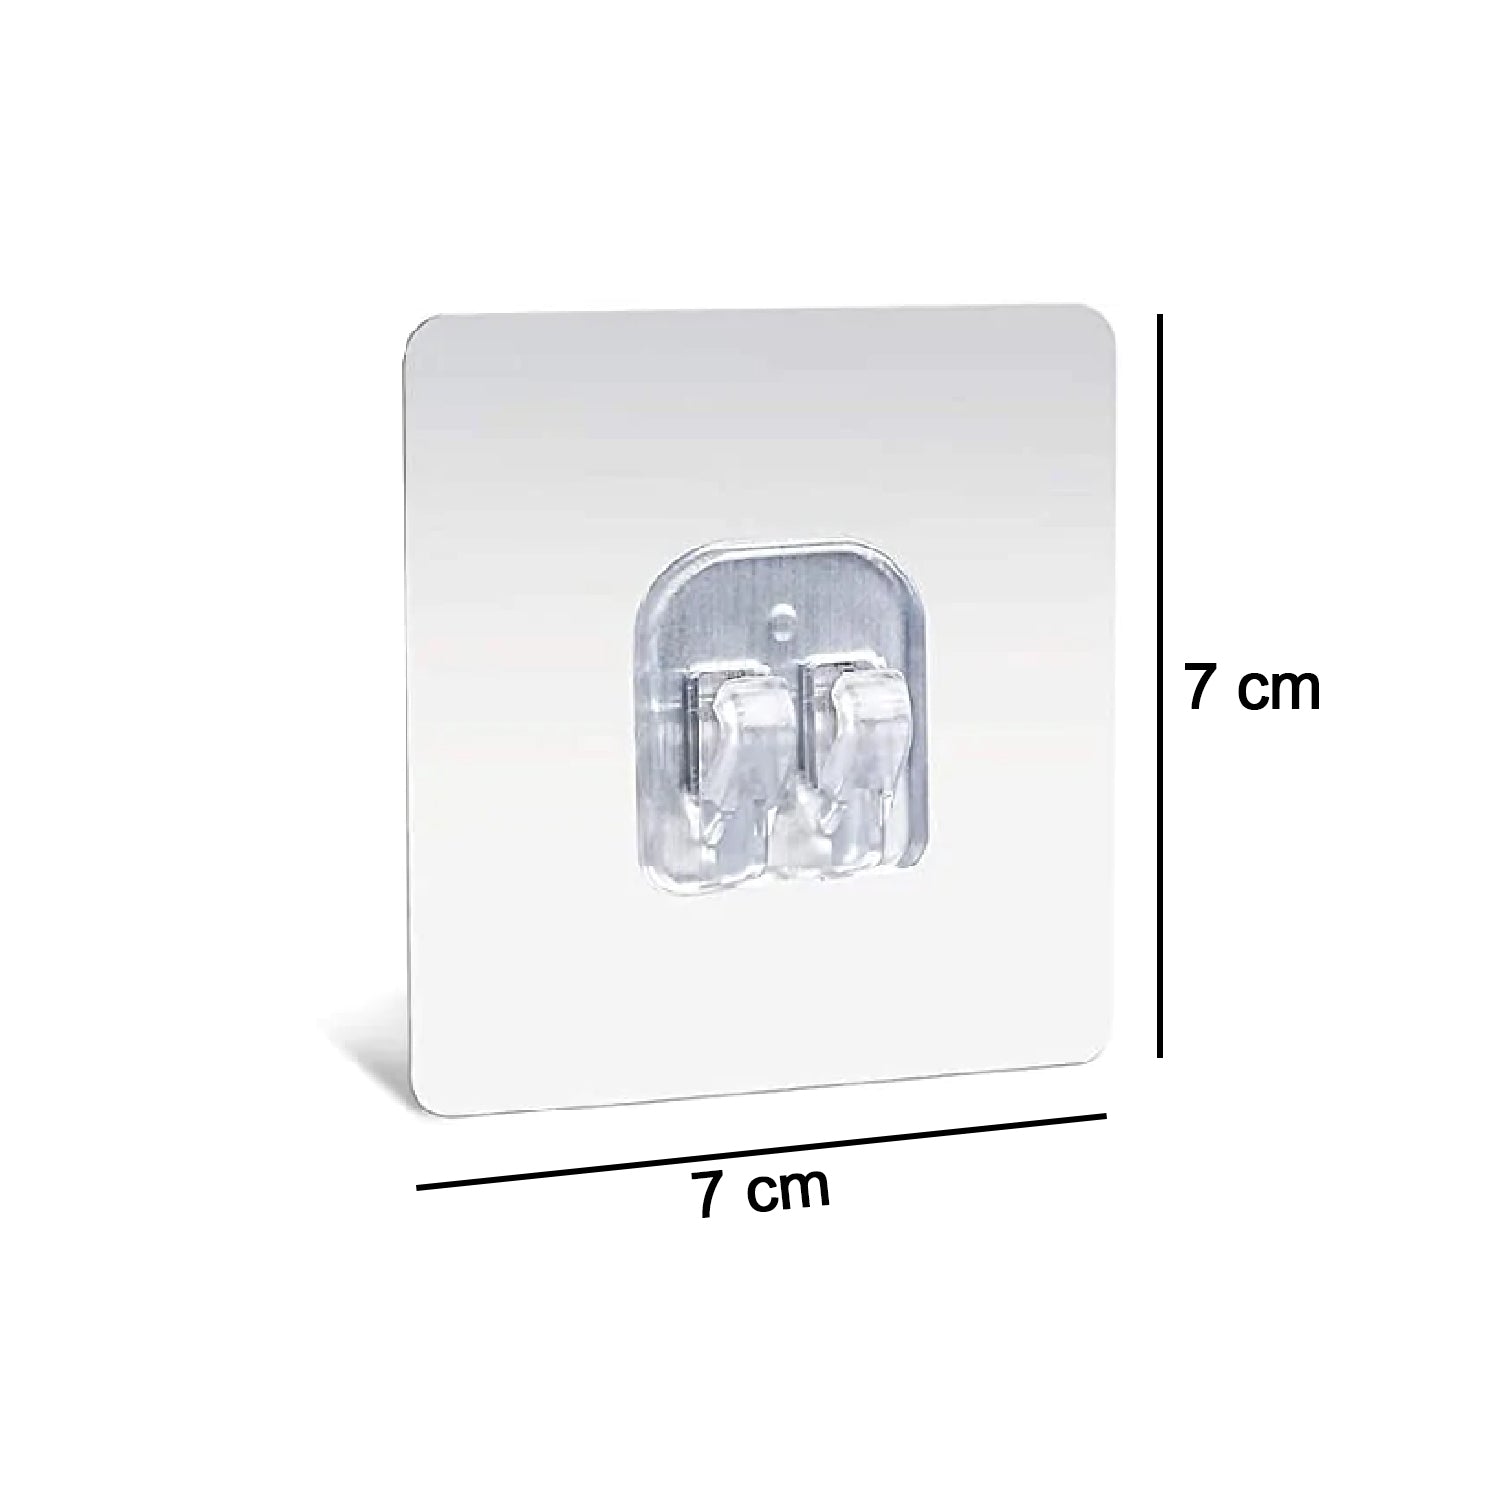 7434 Adhesive Sticky Waterproof and Oil Proof, Reusable Wall Utility Seamless Wall Hook DeoDap